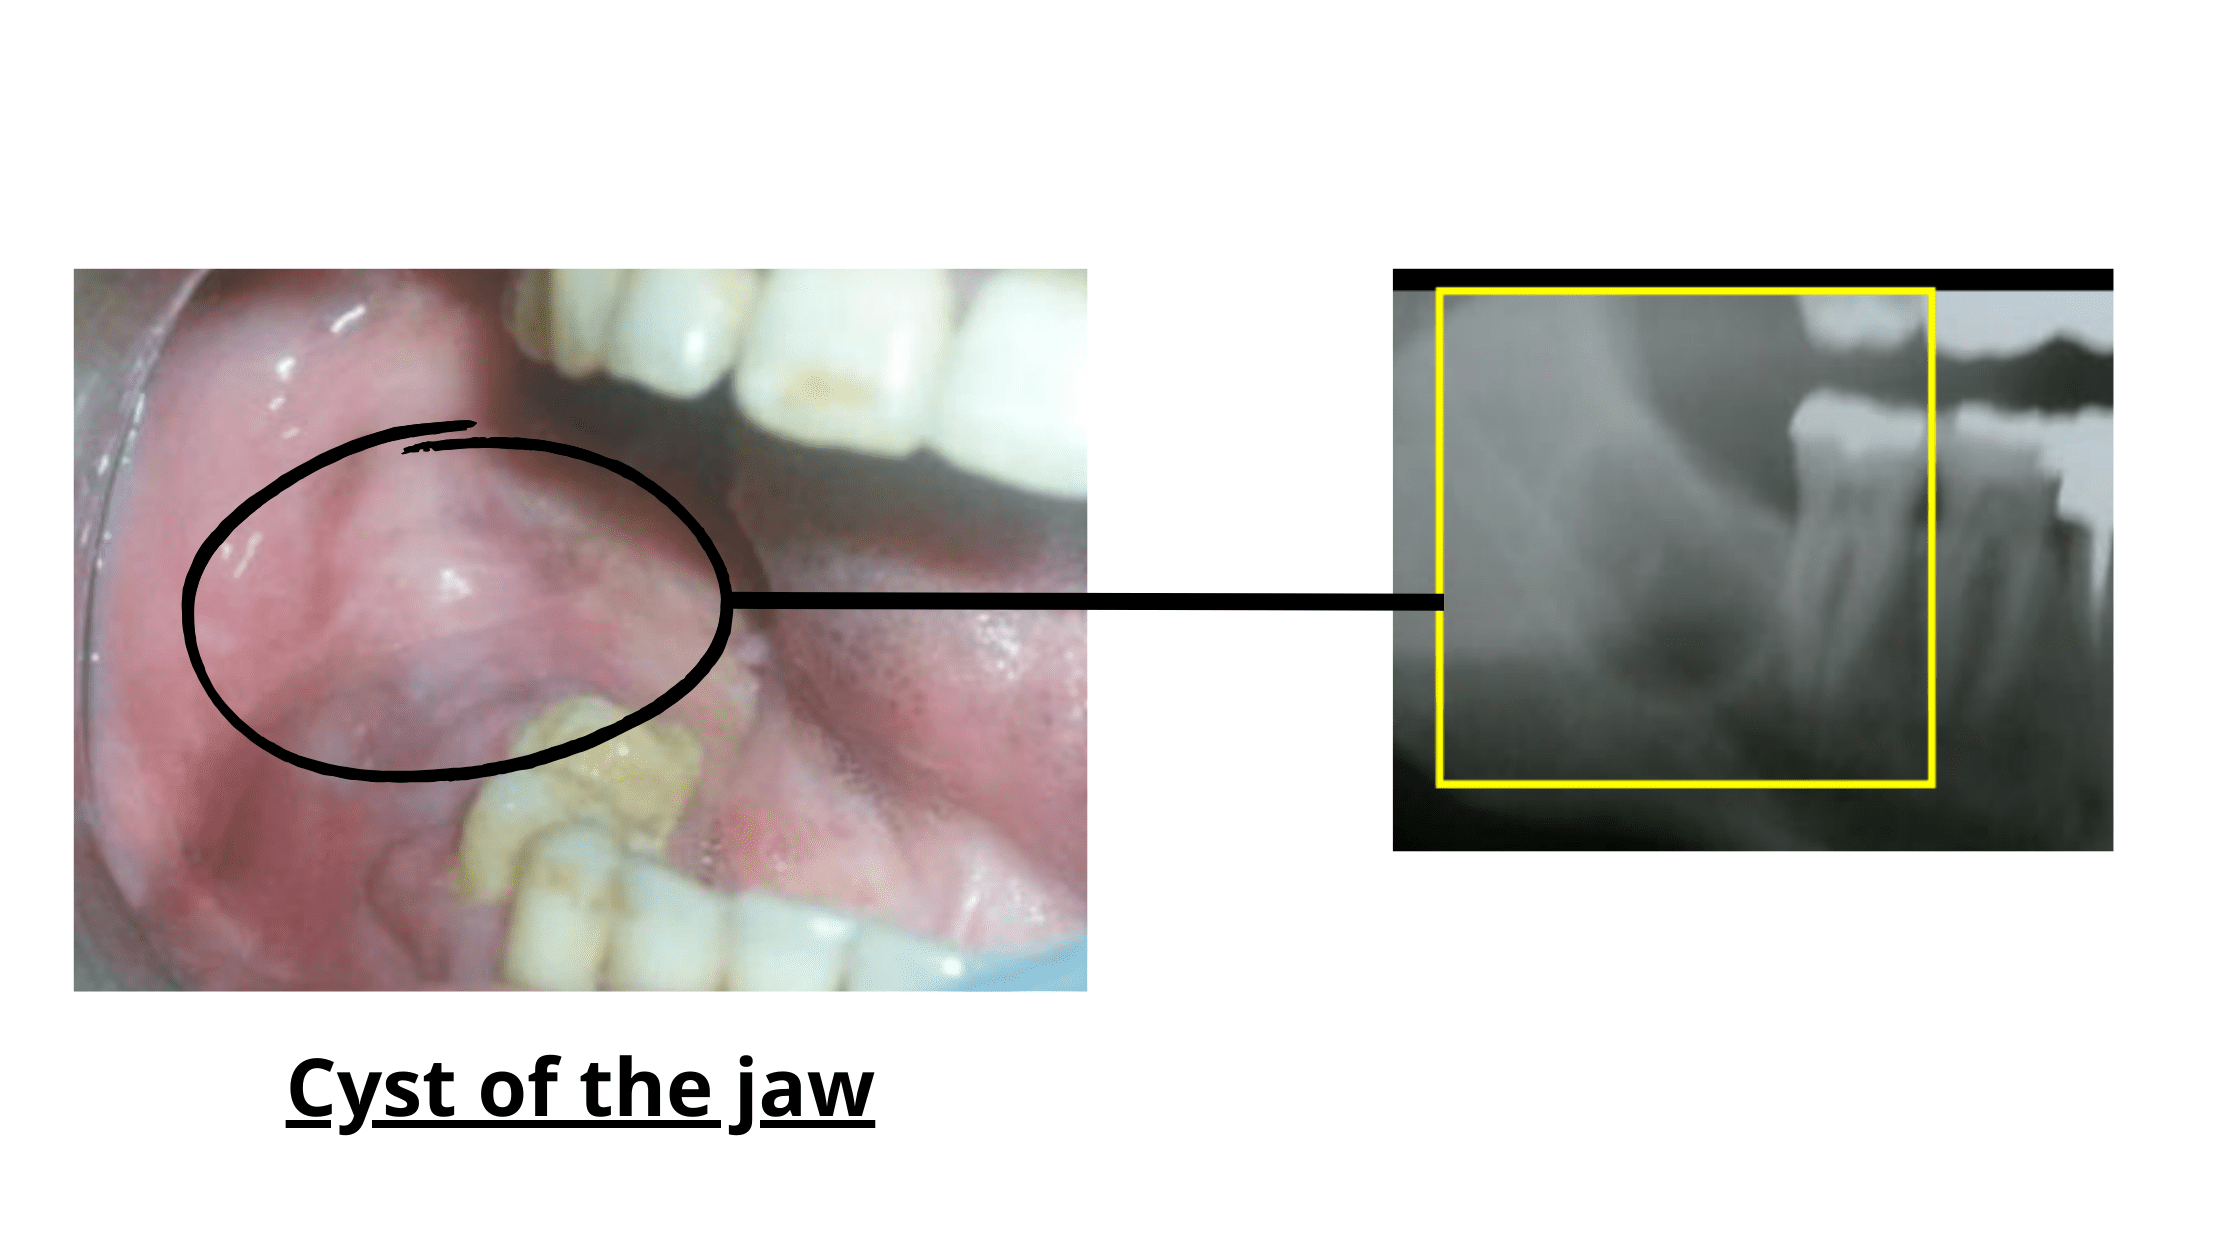 cyst on the jaw after tooth extraction